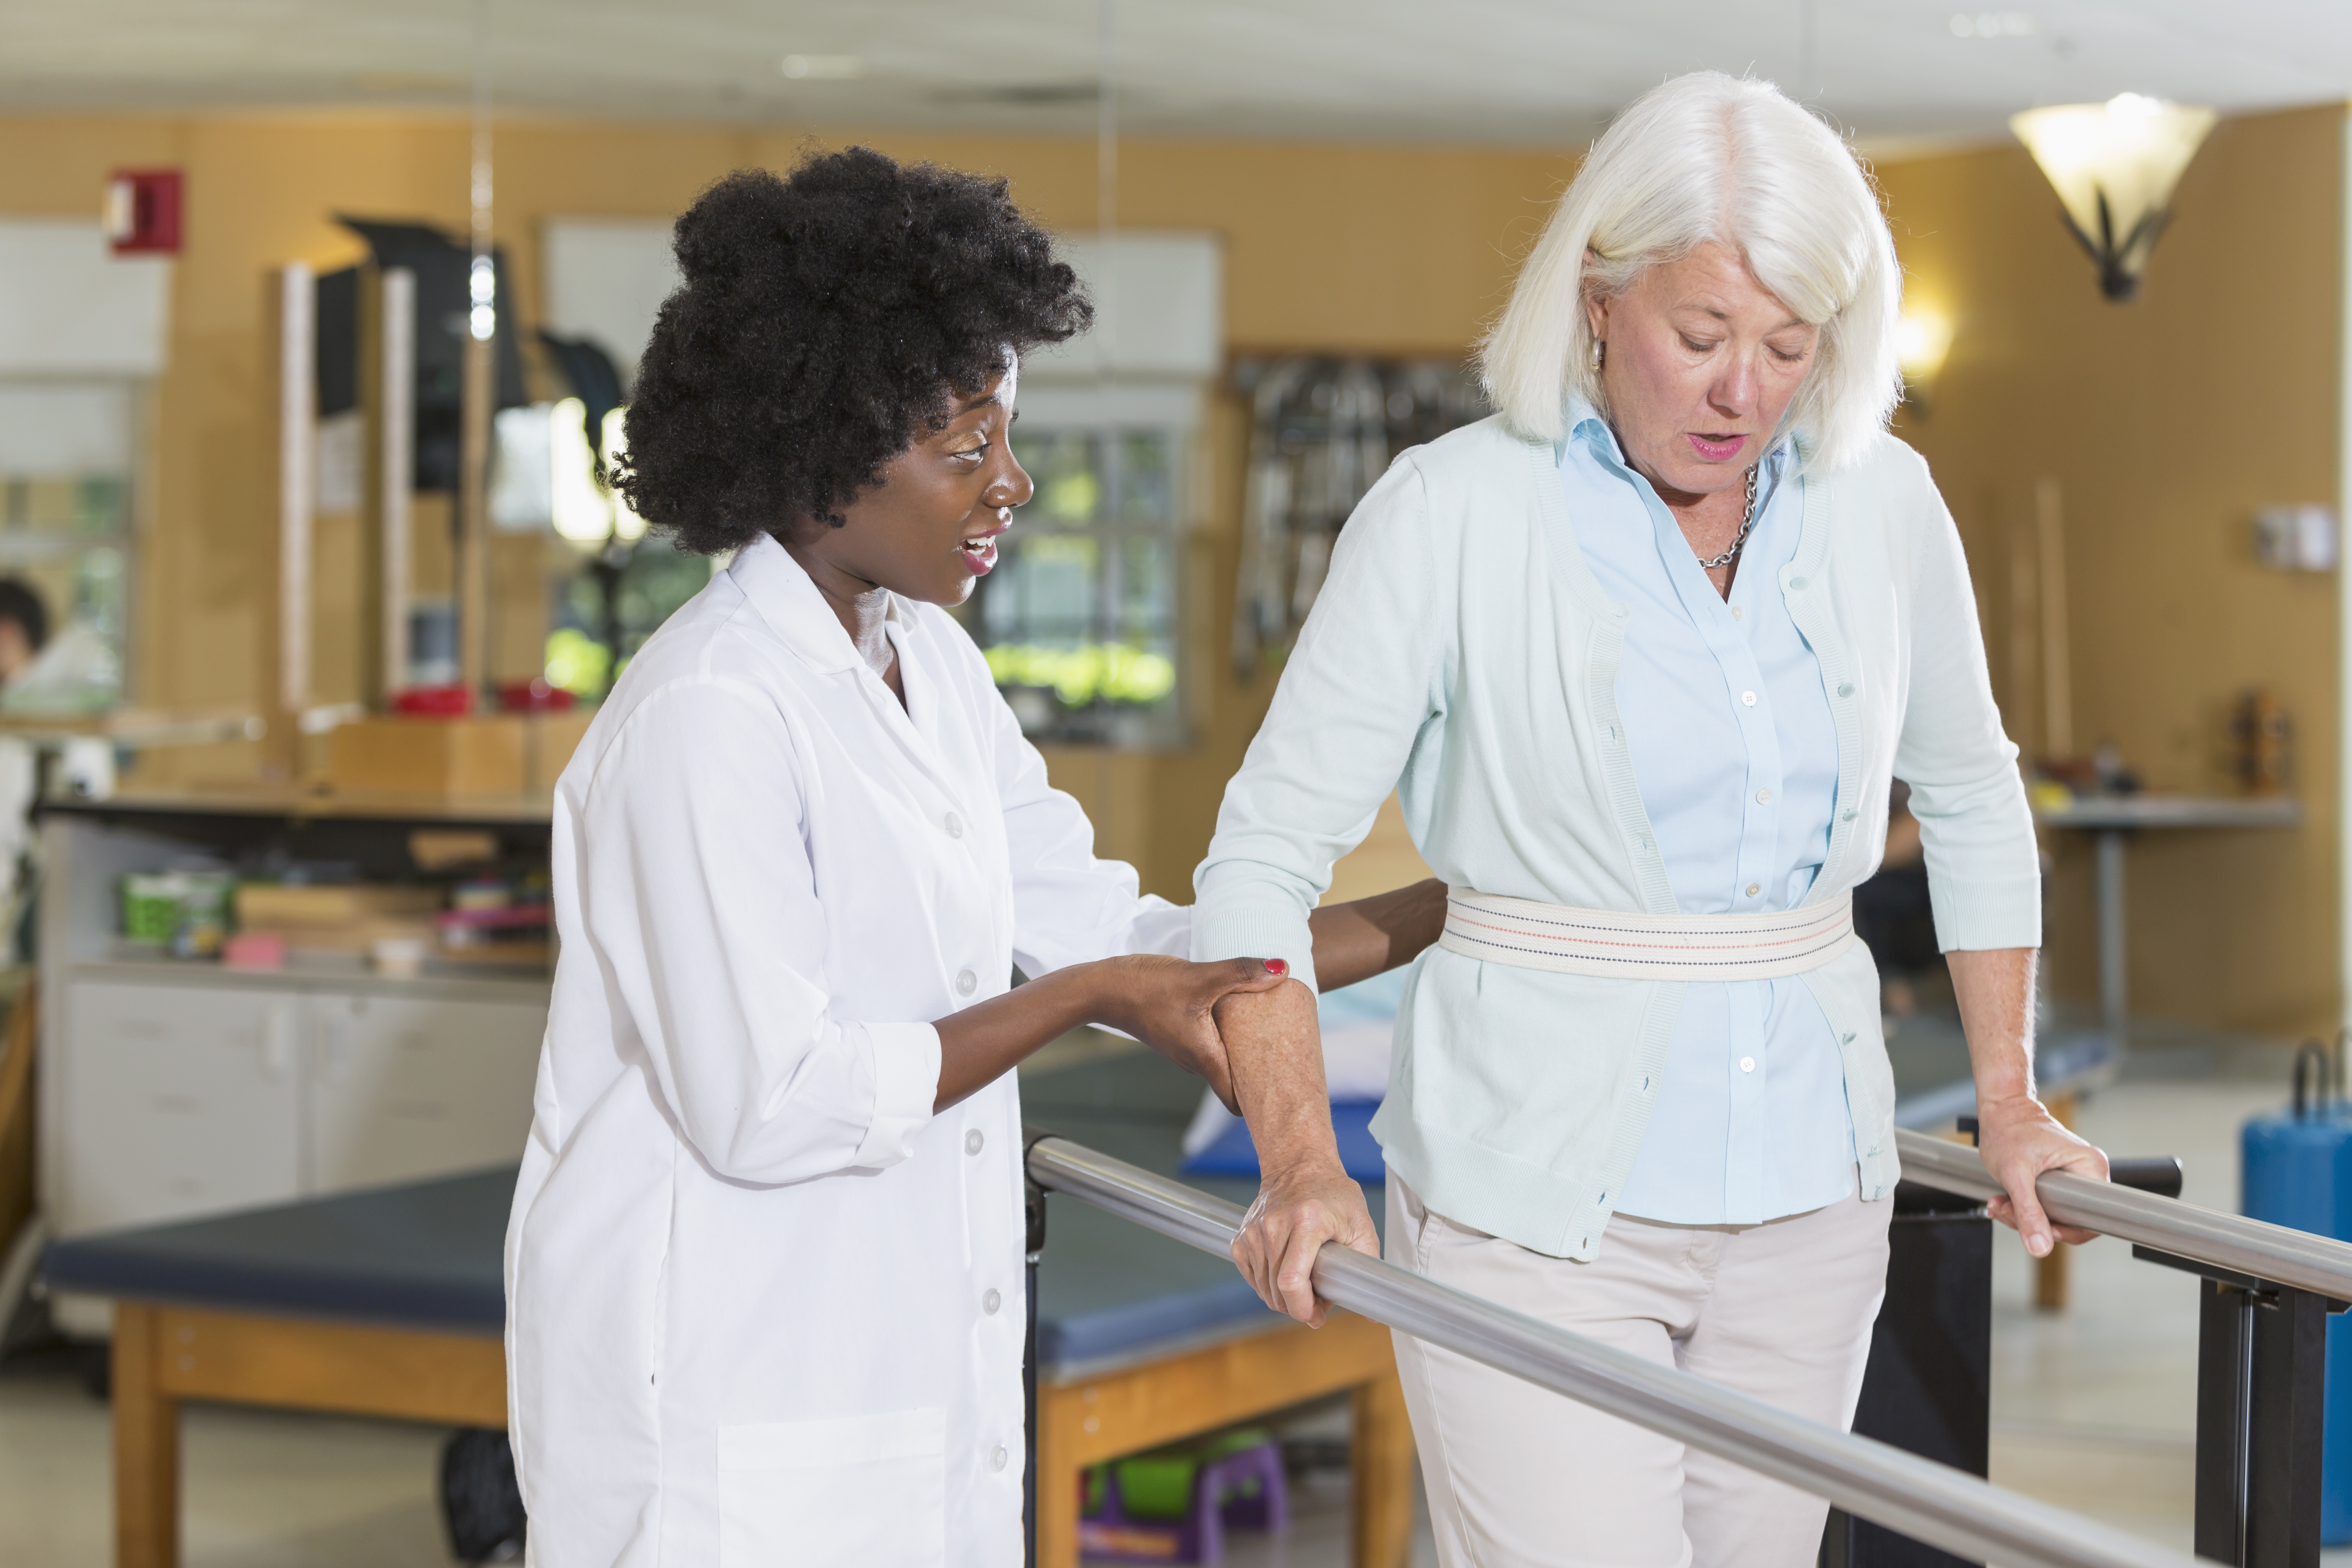 Physical therapist working with female patient on walking gait and balance